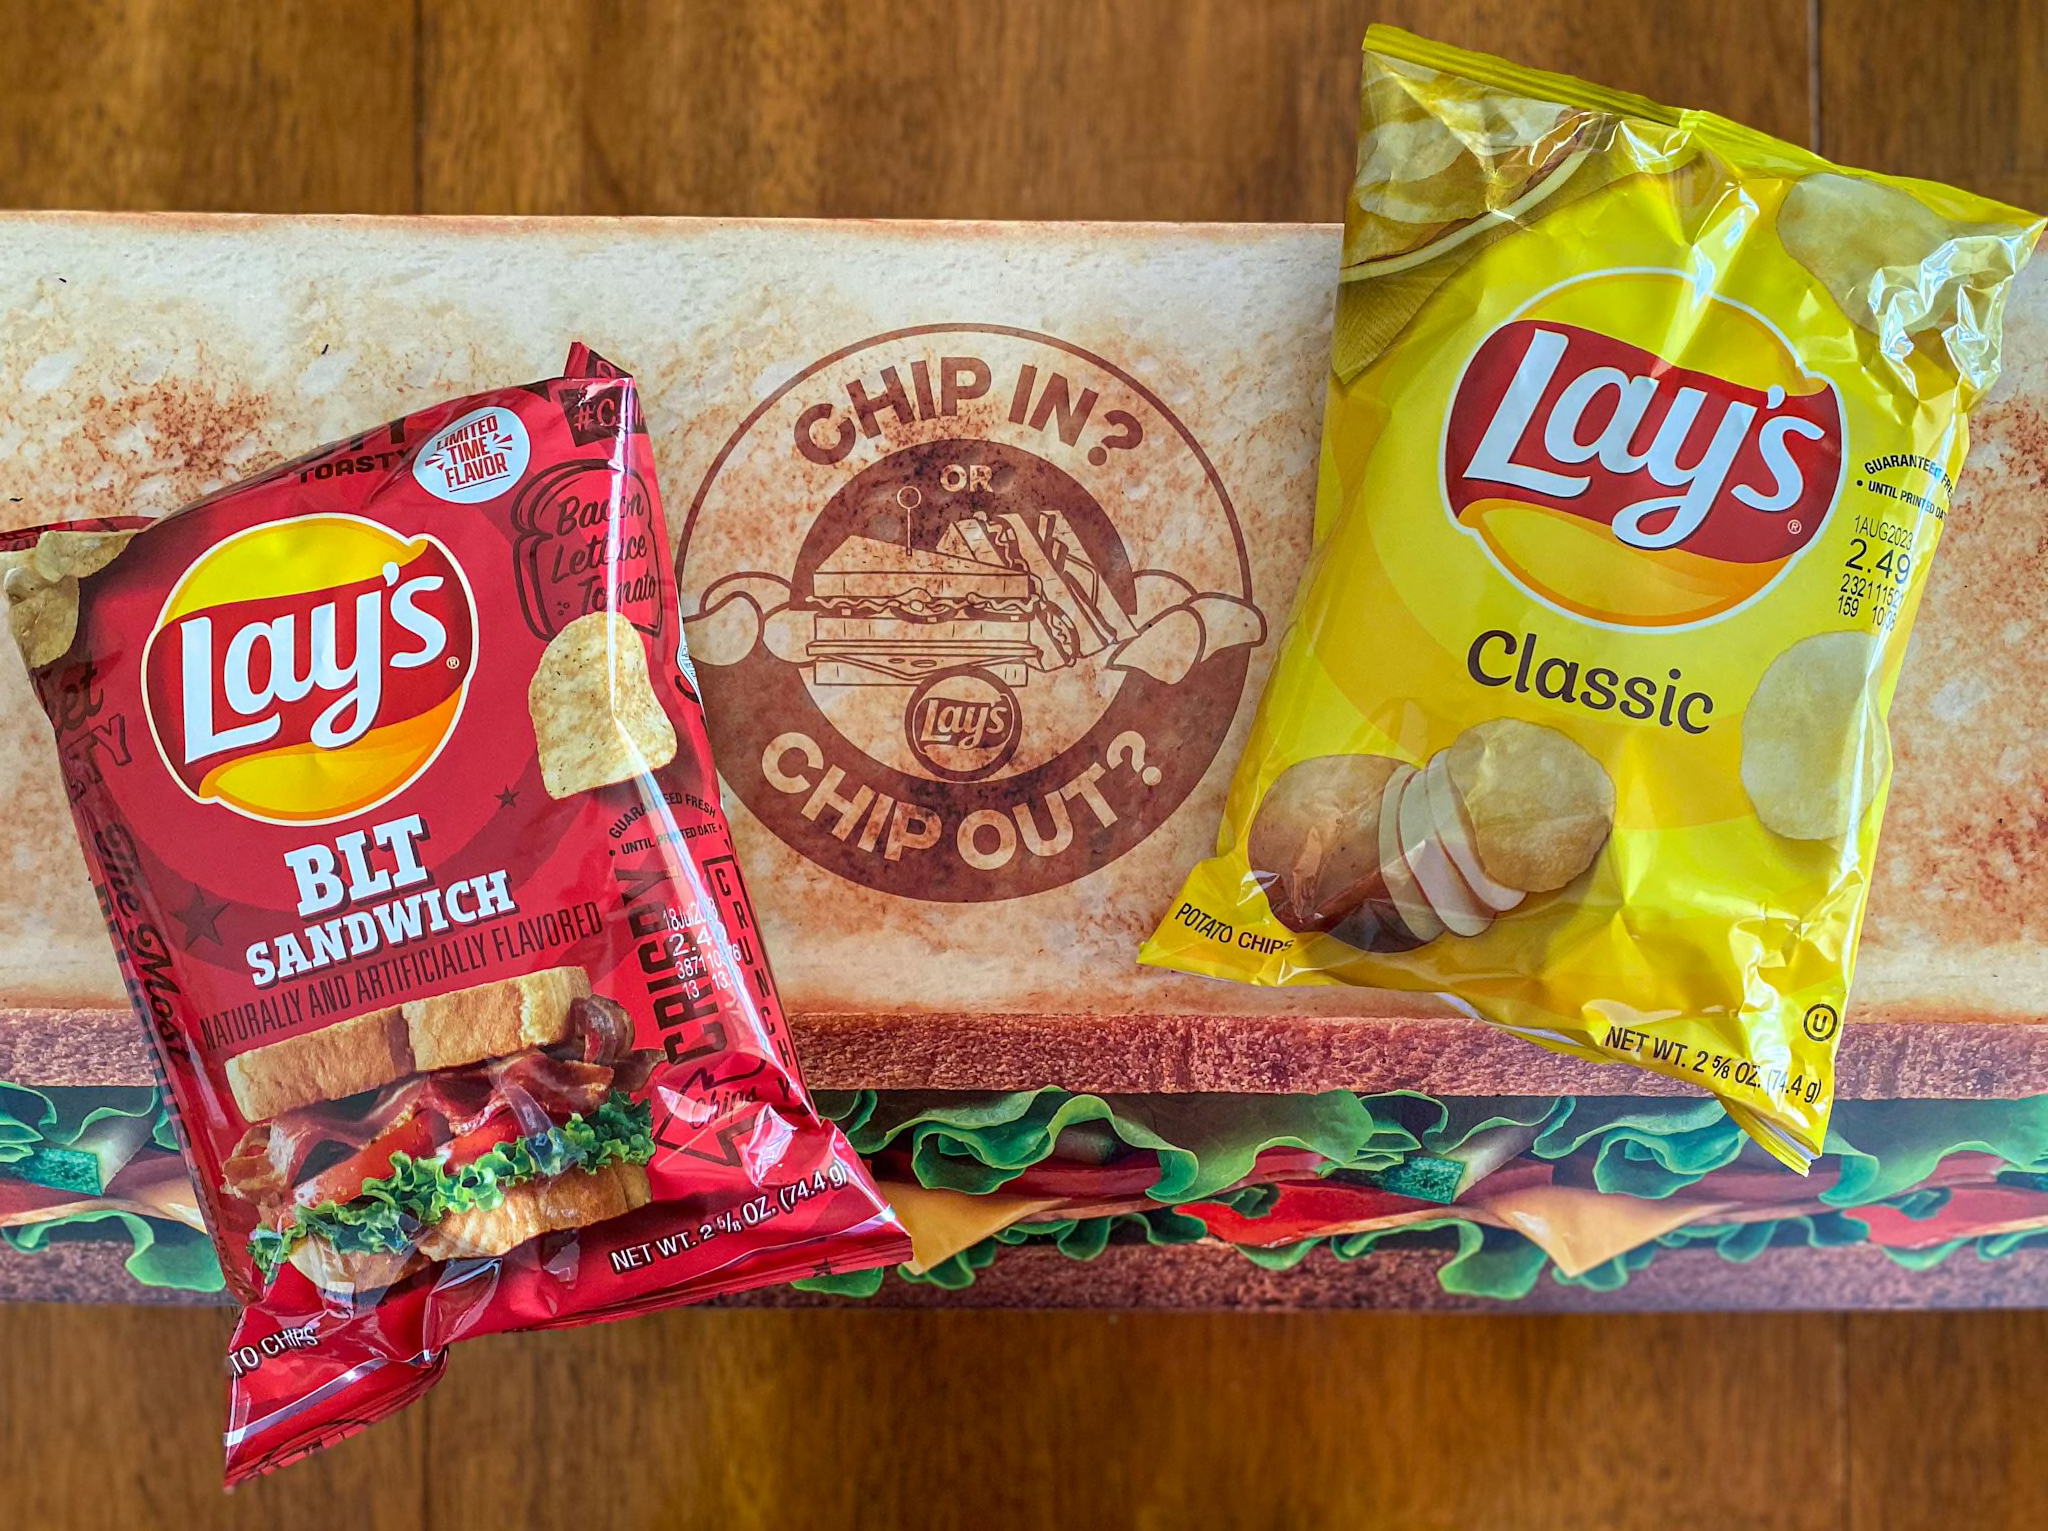 Lay’s sandwich inspired chips include BLT sandwich